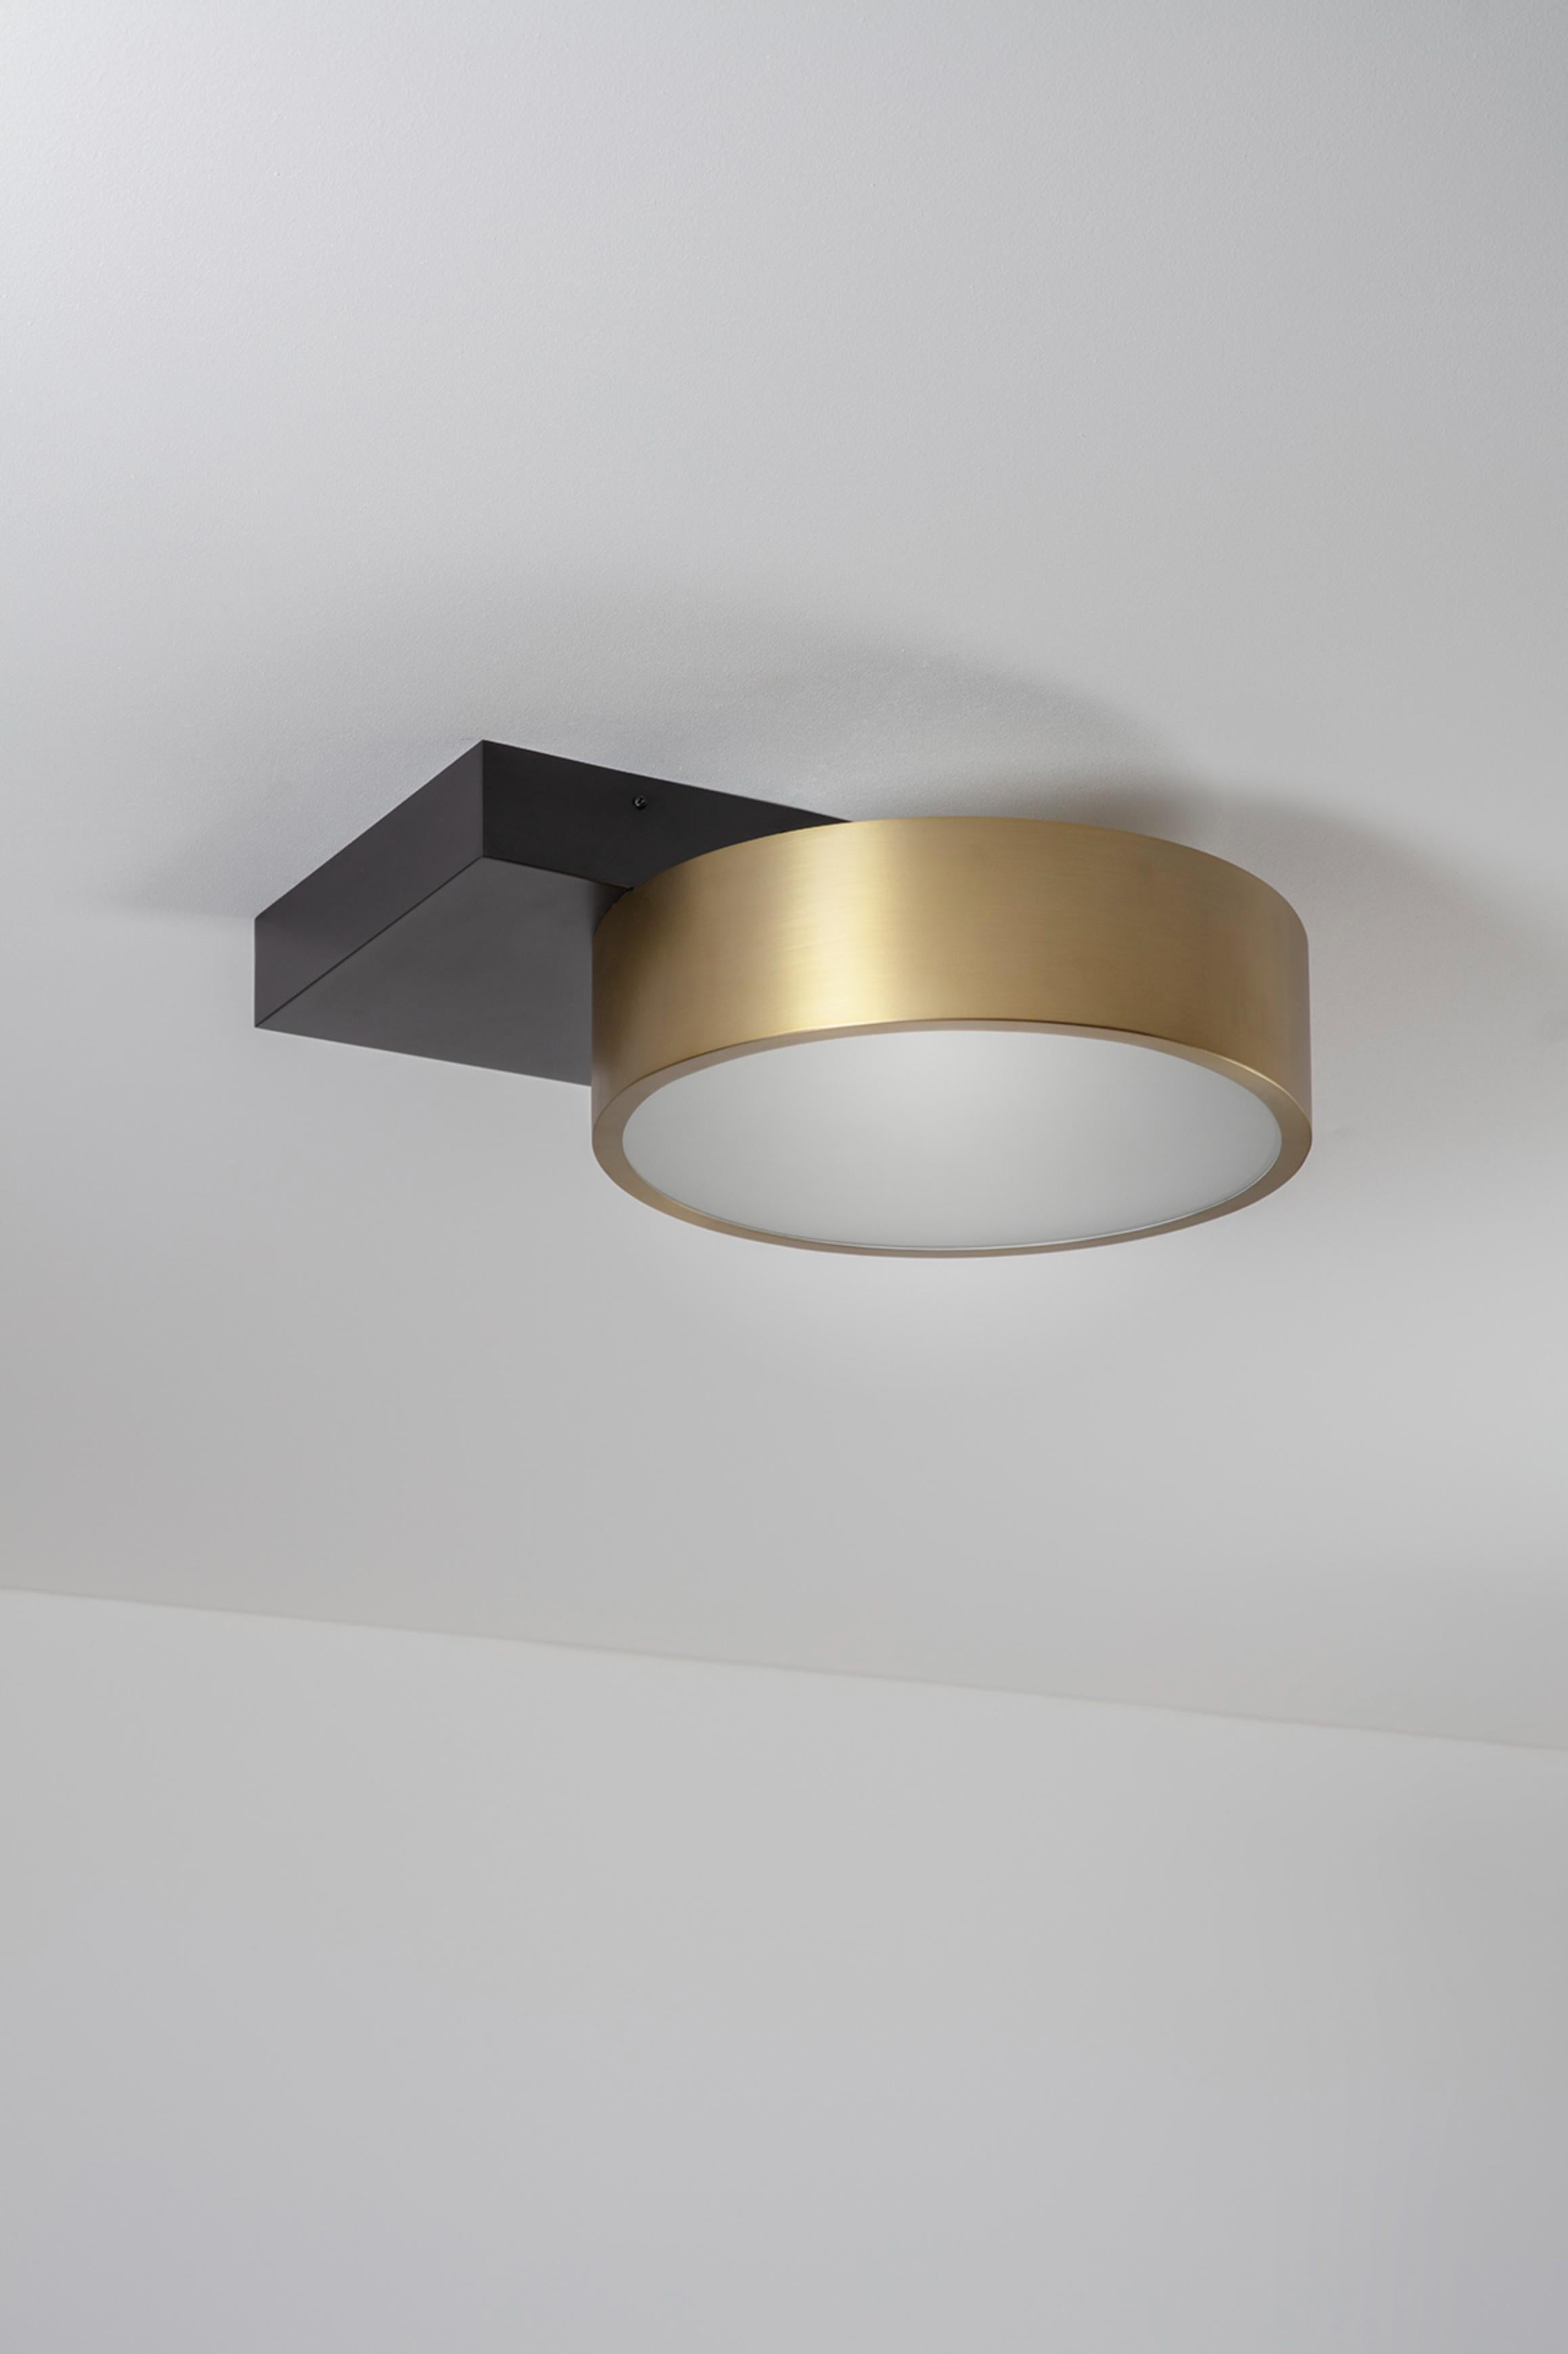 Square in Circle Ceiling Light by Square in Circle
Dimensions: D 43 x W 43 x H 16 cm
Materials:Brushed brass/Dark bronze/ white frosted glass
Other finishes available.

Simple, yet innovative, the round brushed brass ceiling light is attached to a